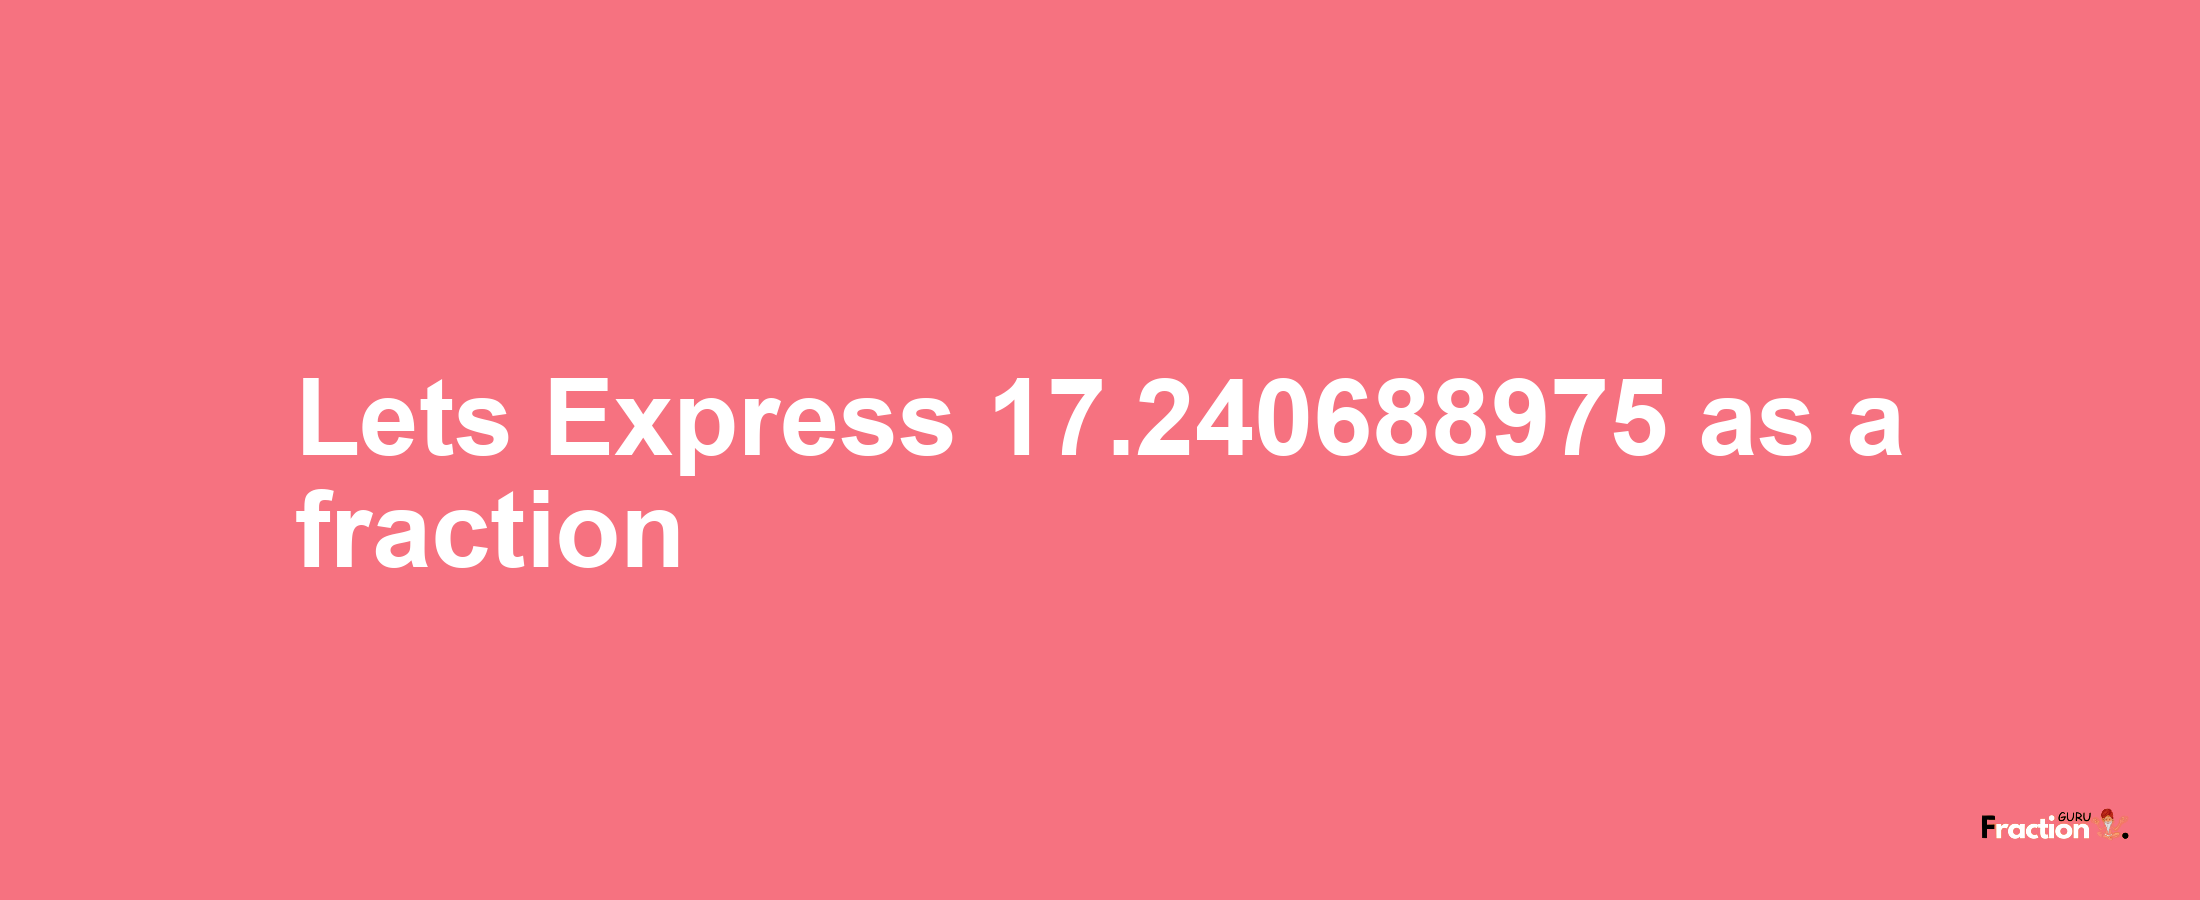 Lets Express 17.240688975 as afraction